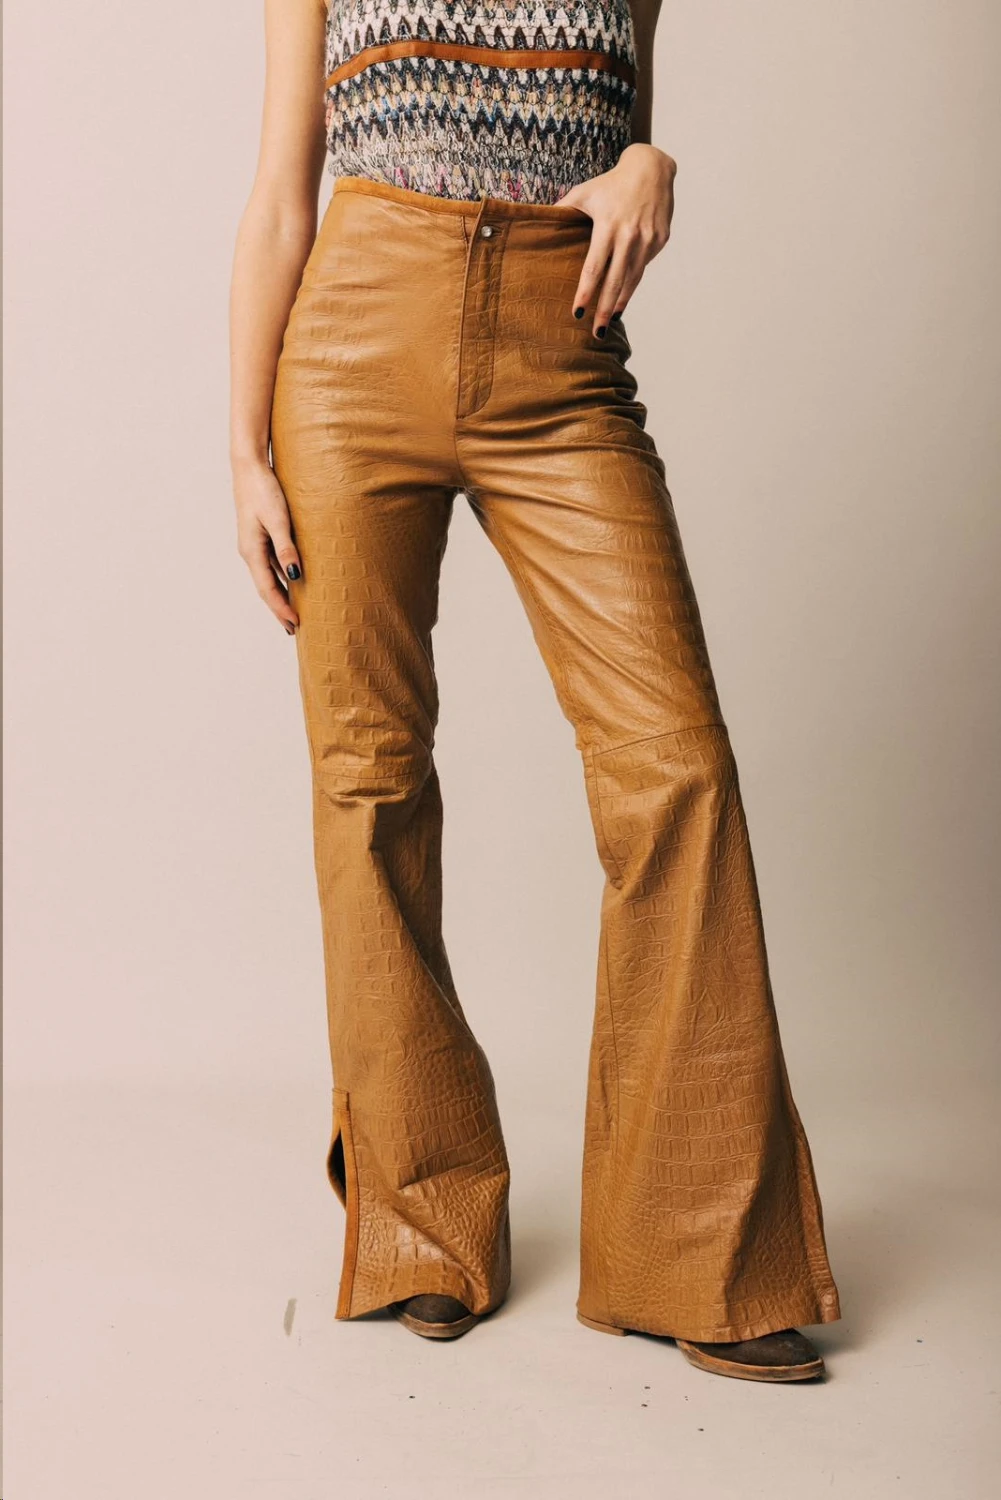 Formal Leather Pants Crocco camel 42